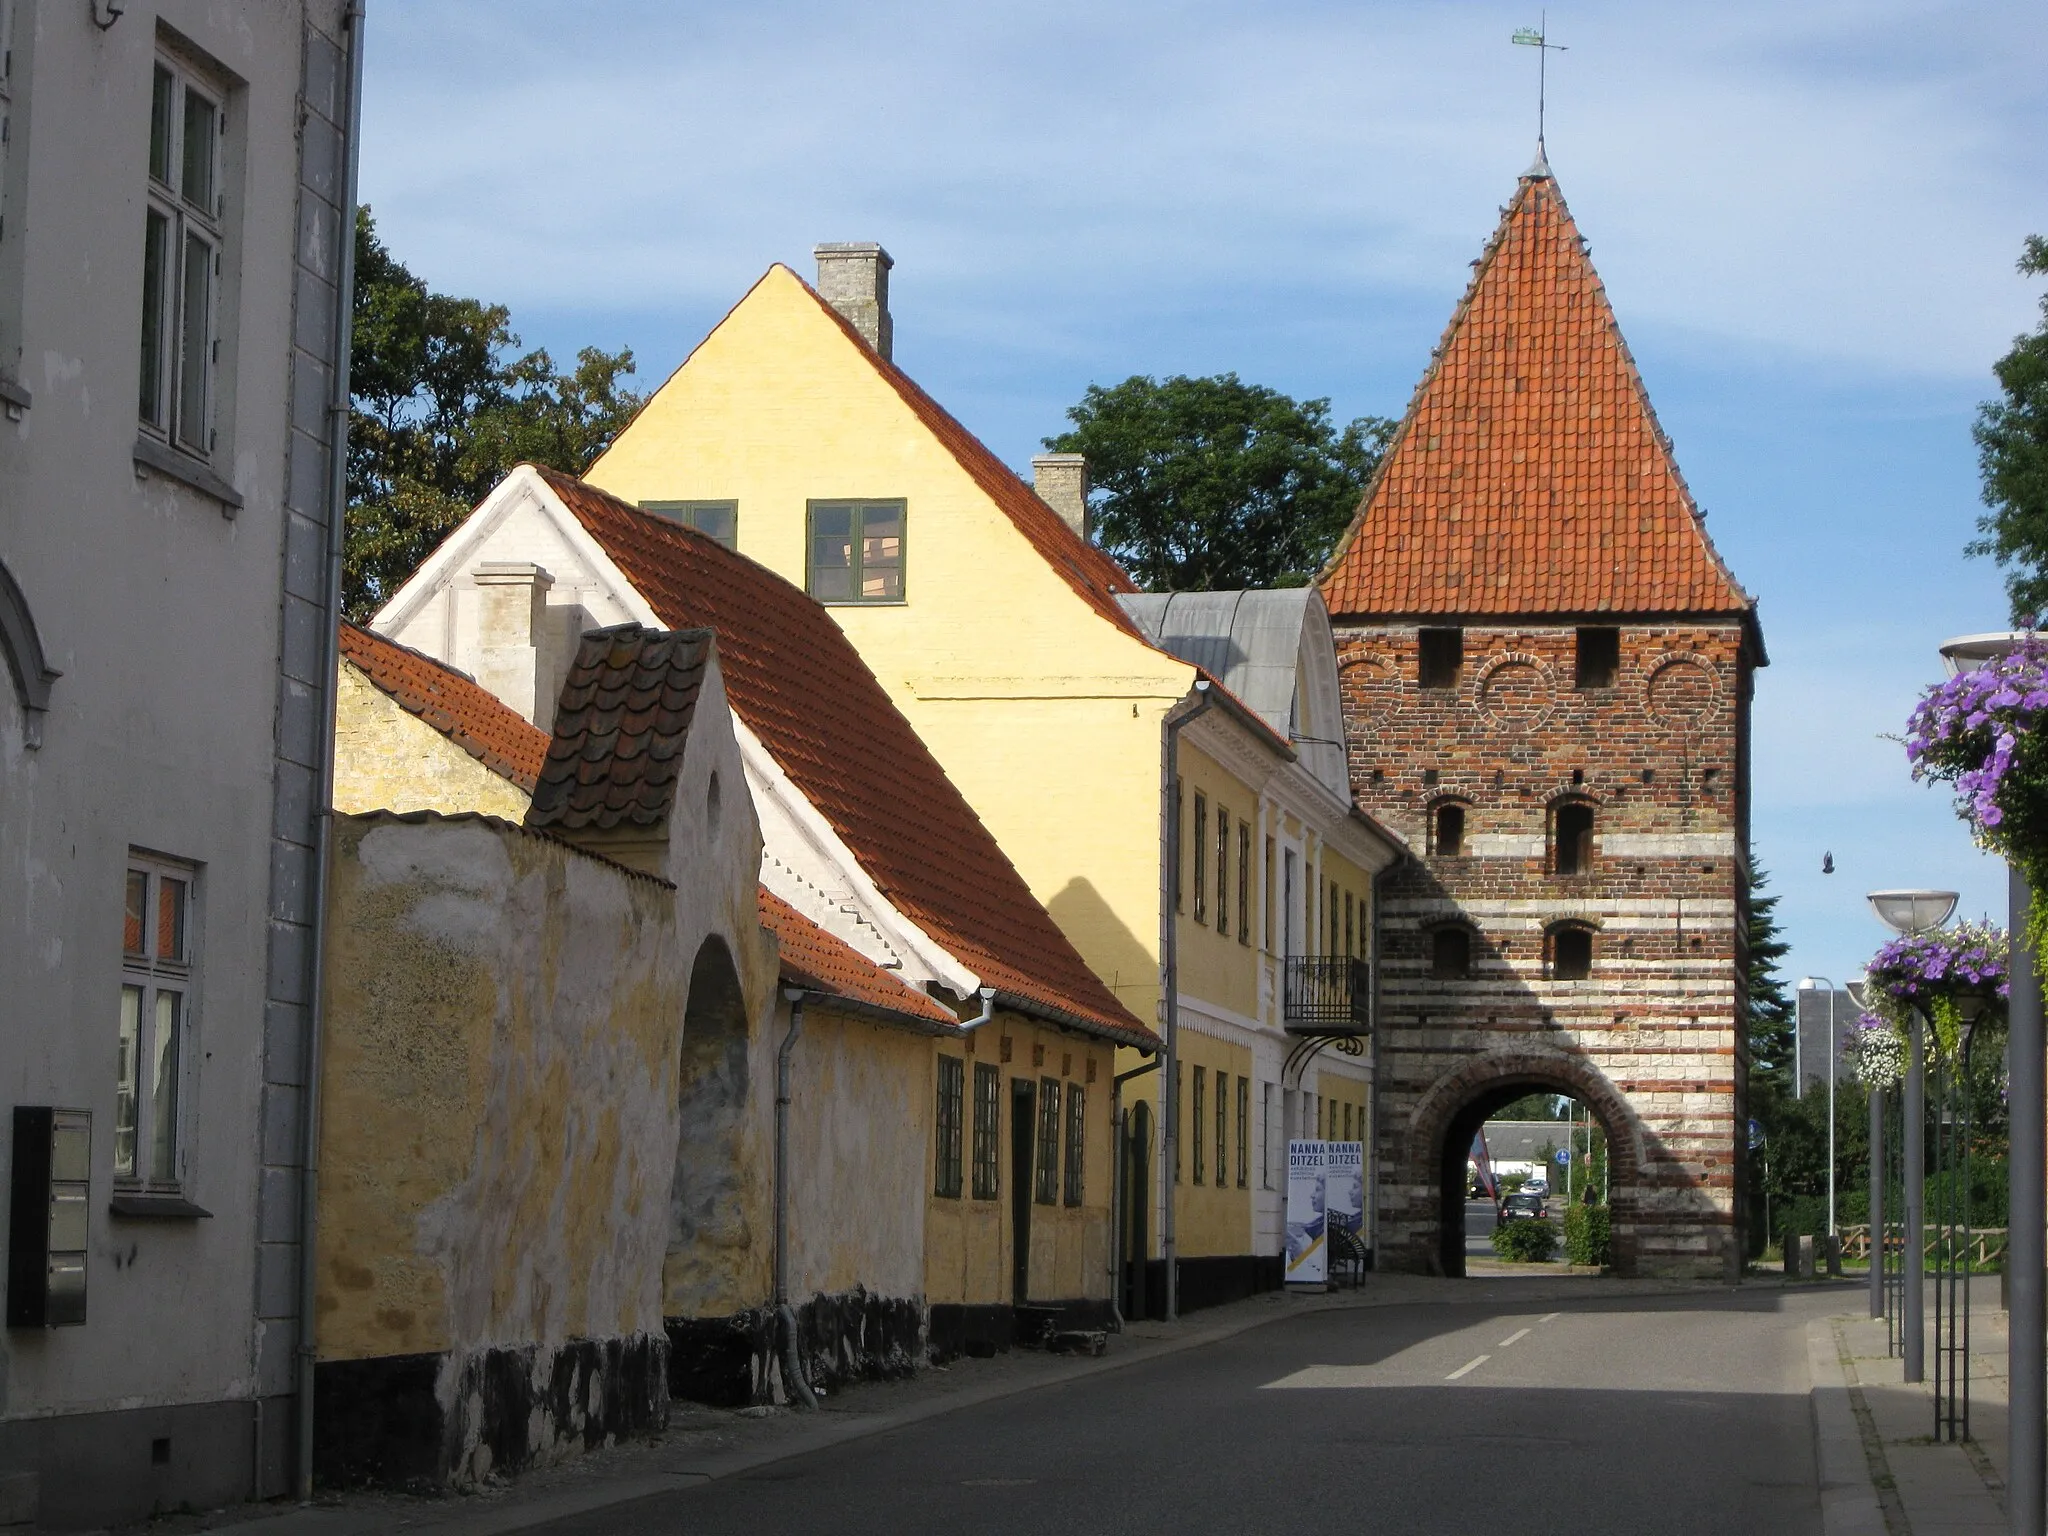 Photo showing: The old town gate "Mølleporten" located in the small town "Stege" on the island Møn south of Zealand, east Denmark.